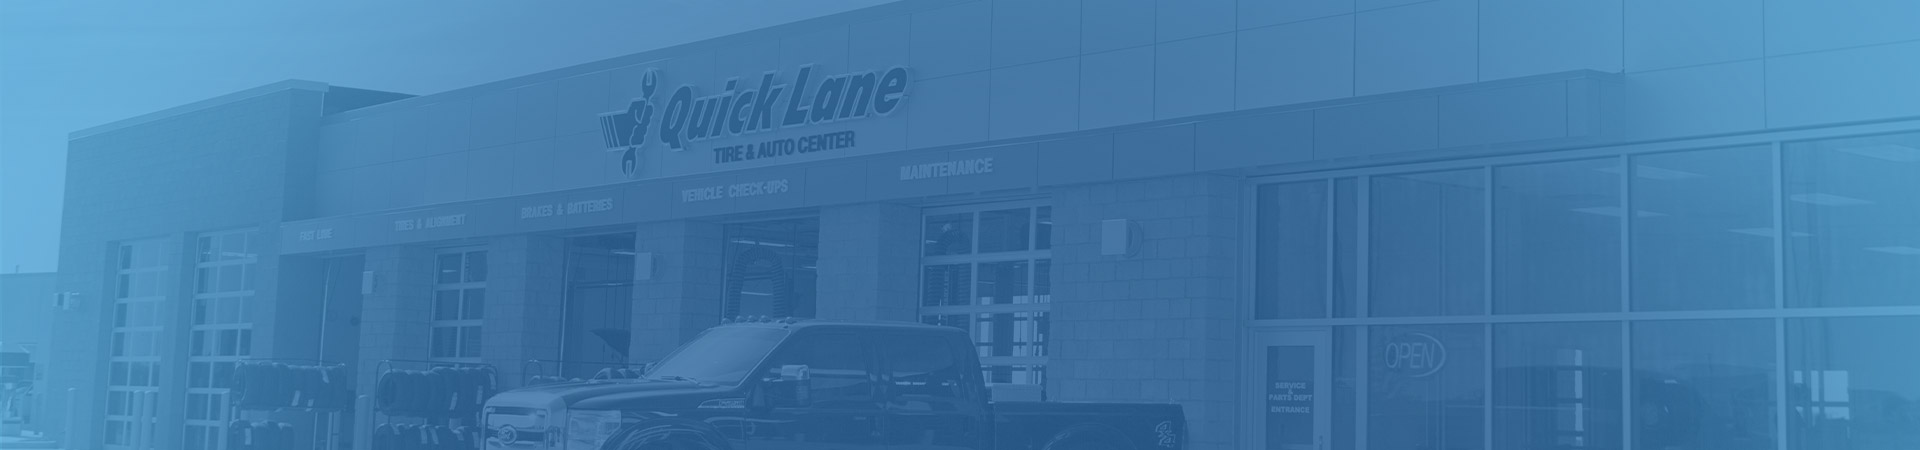 Quick Lane at Anderson Ford South